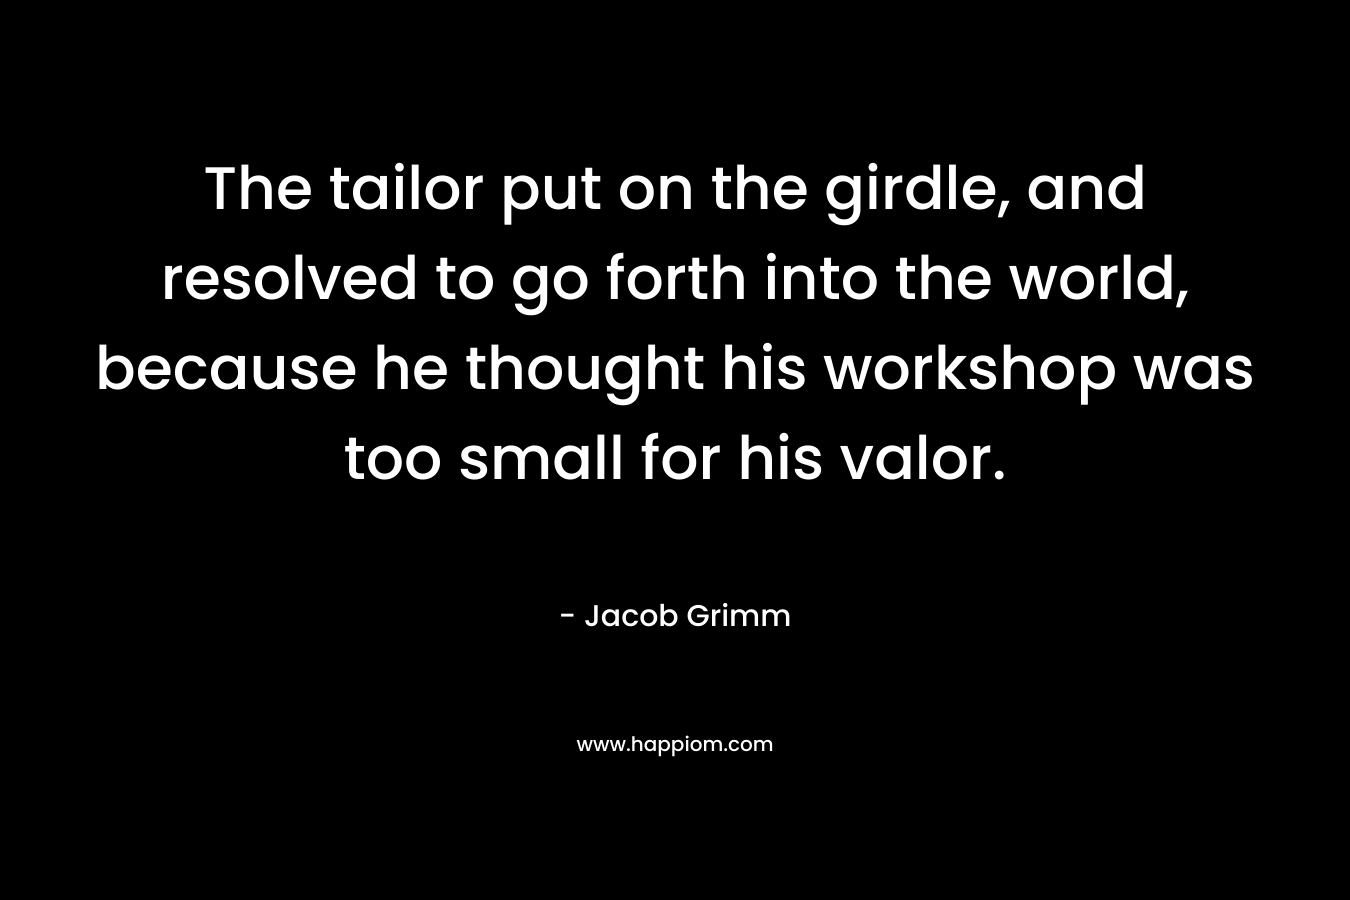 The tailor put on the girdle, and resolved to go forth into the world, because he thought his workshop was too small for his valor.